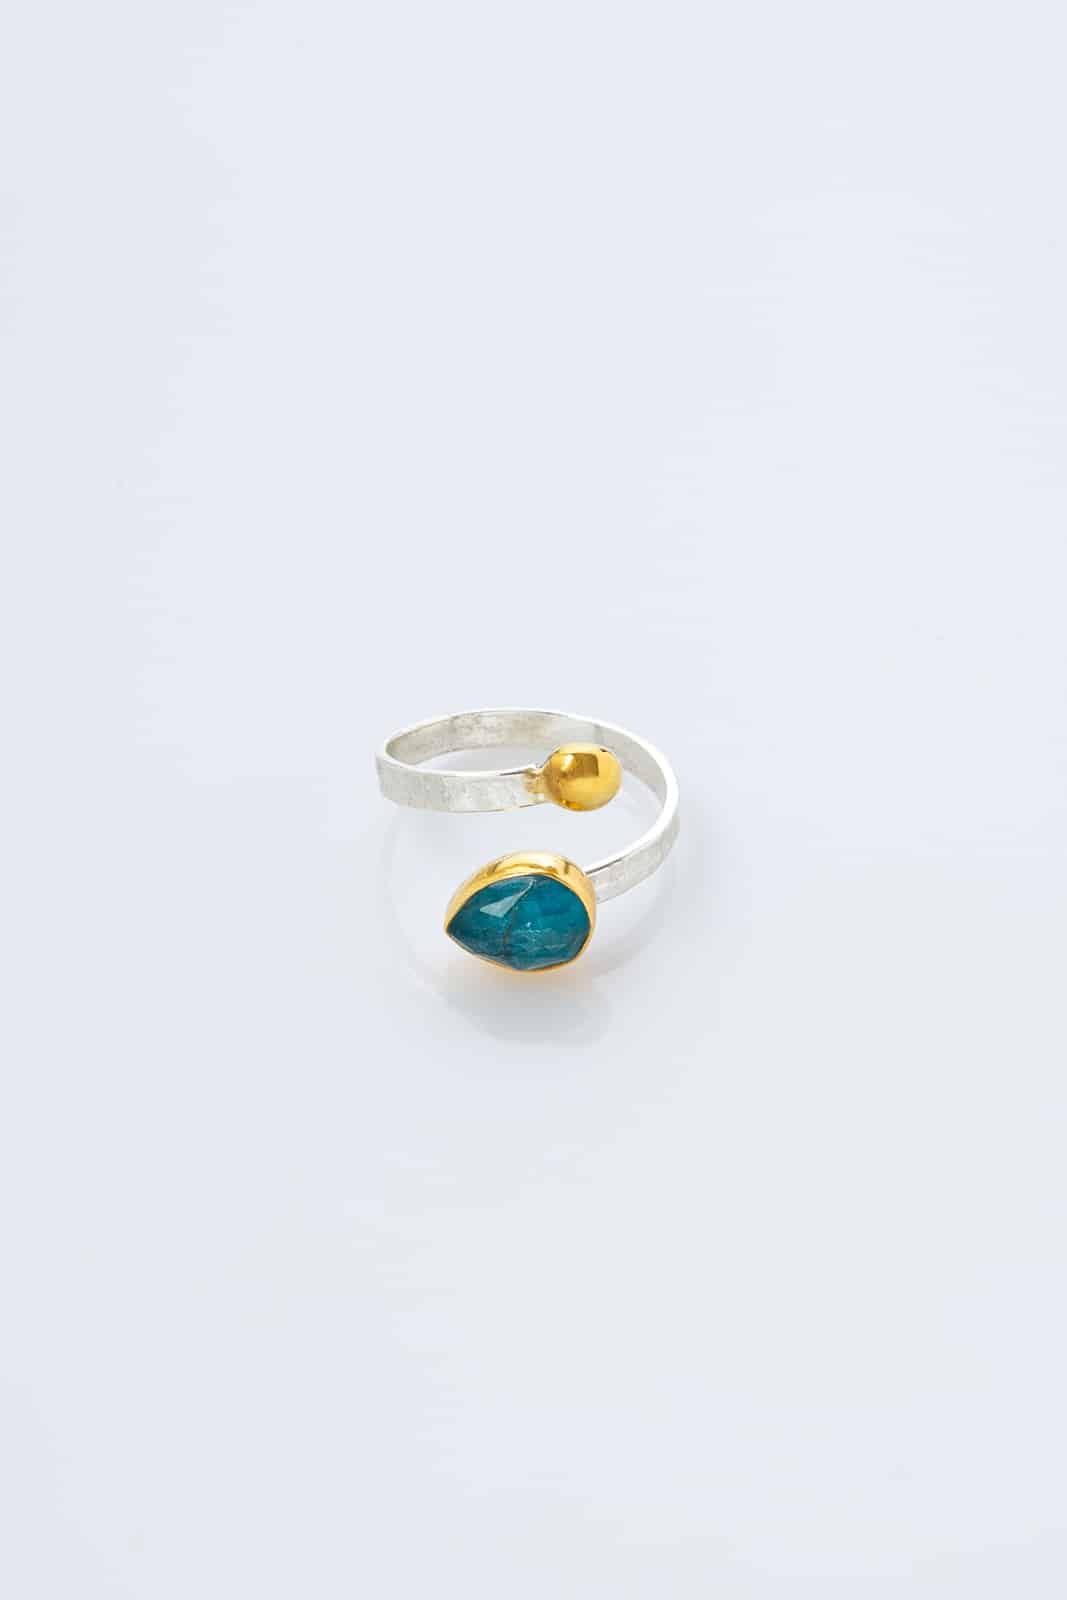 RING GOLD SILVER APATITE